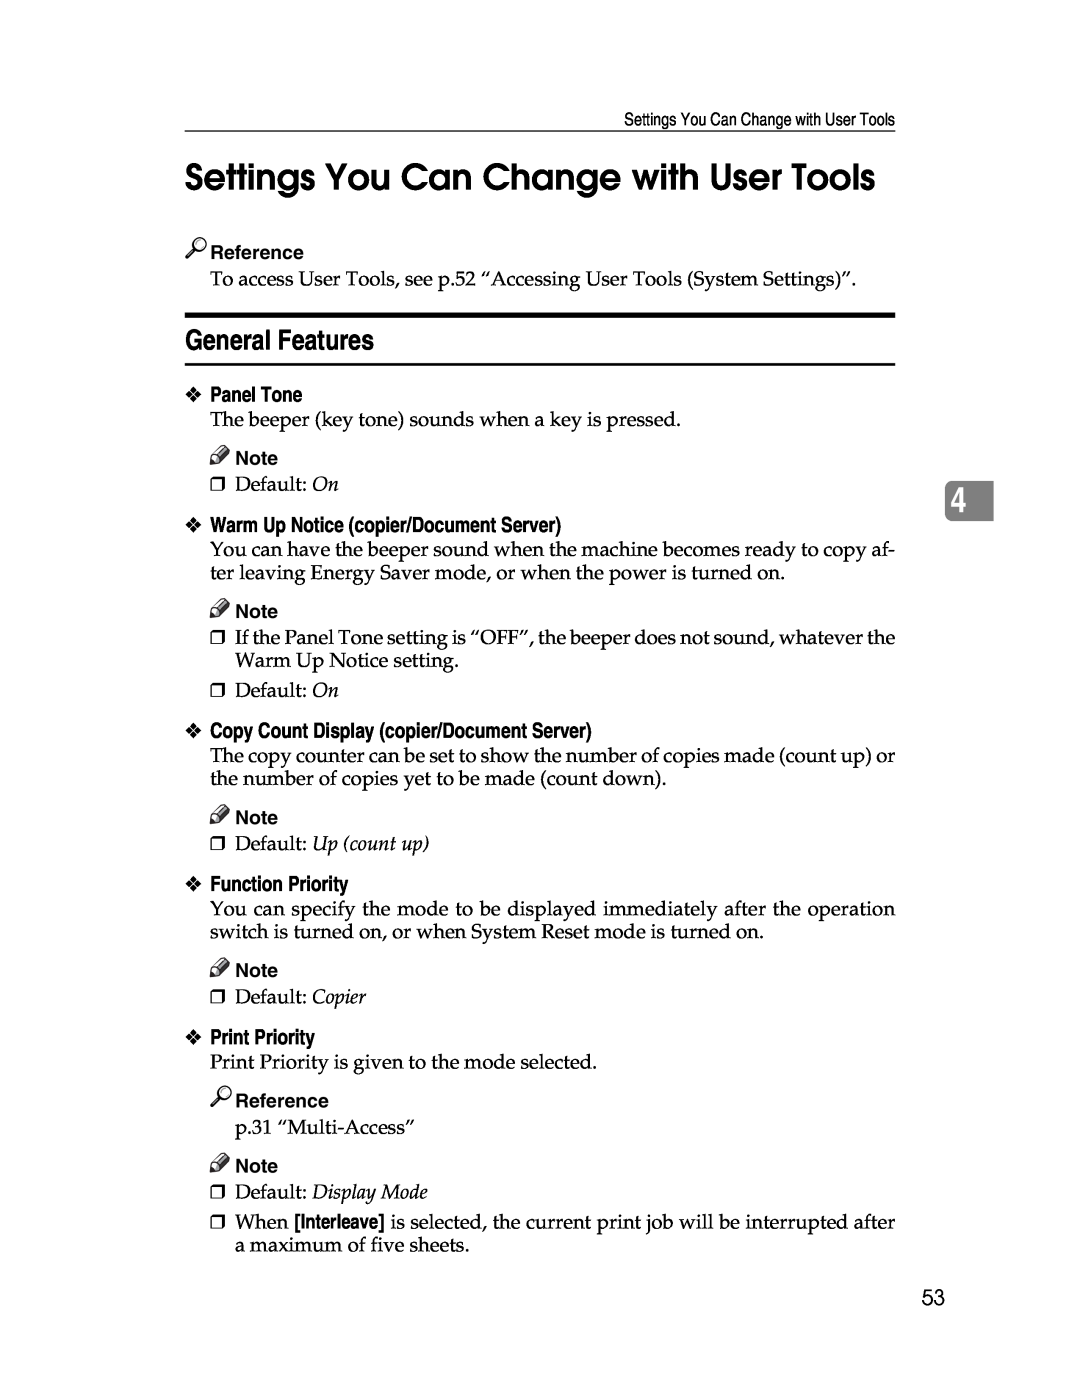 Lanier LD230 Settings You Can Change with User Tools, General Features, Panel Tone, Warm Up Notice copier/Document Server 